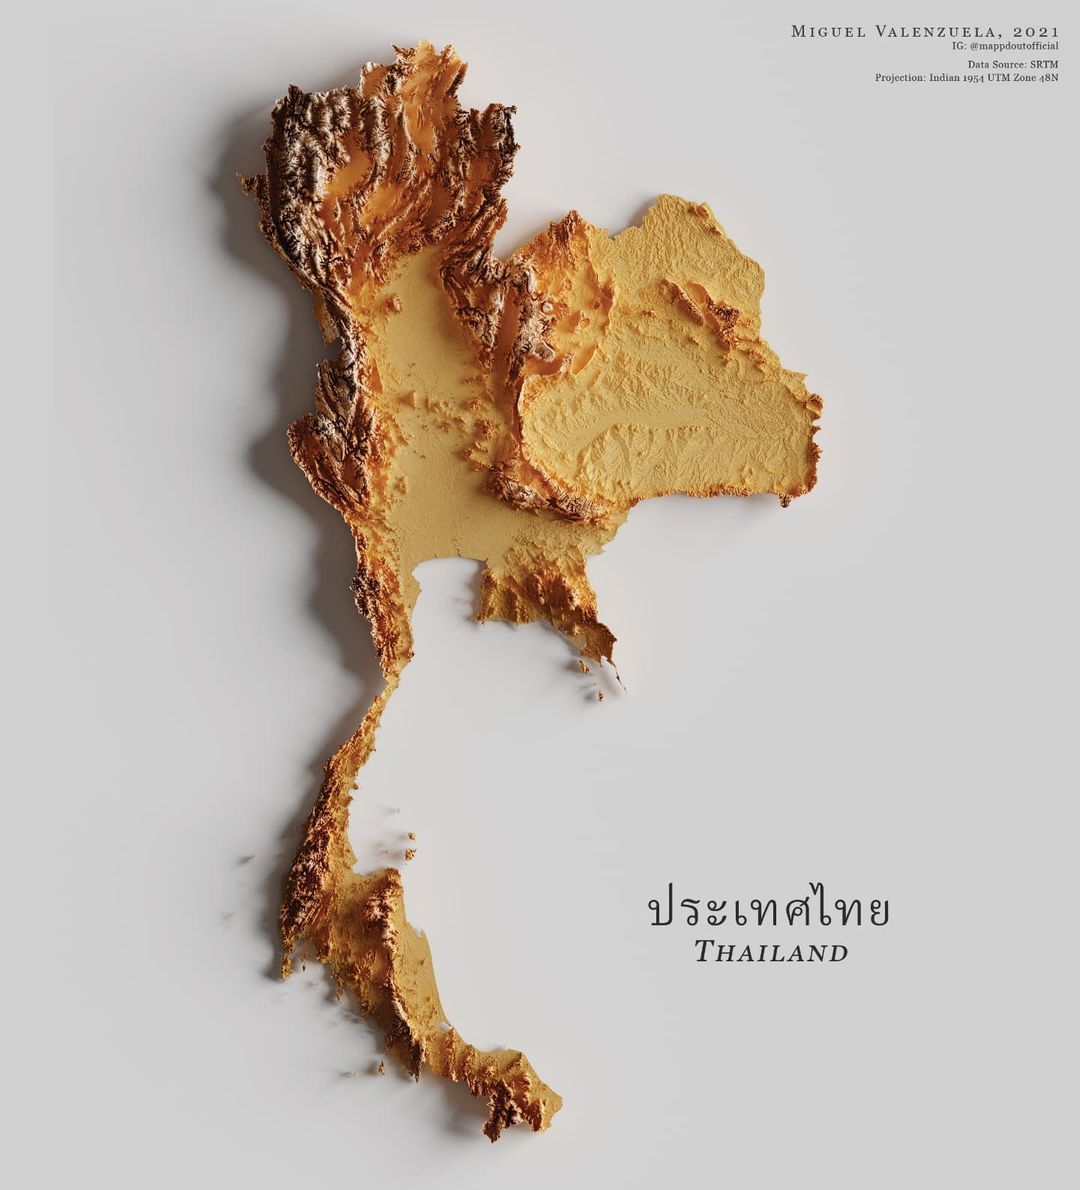 Topography of Thailand 🇹🇭